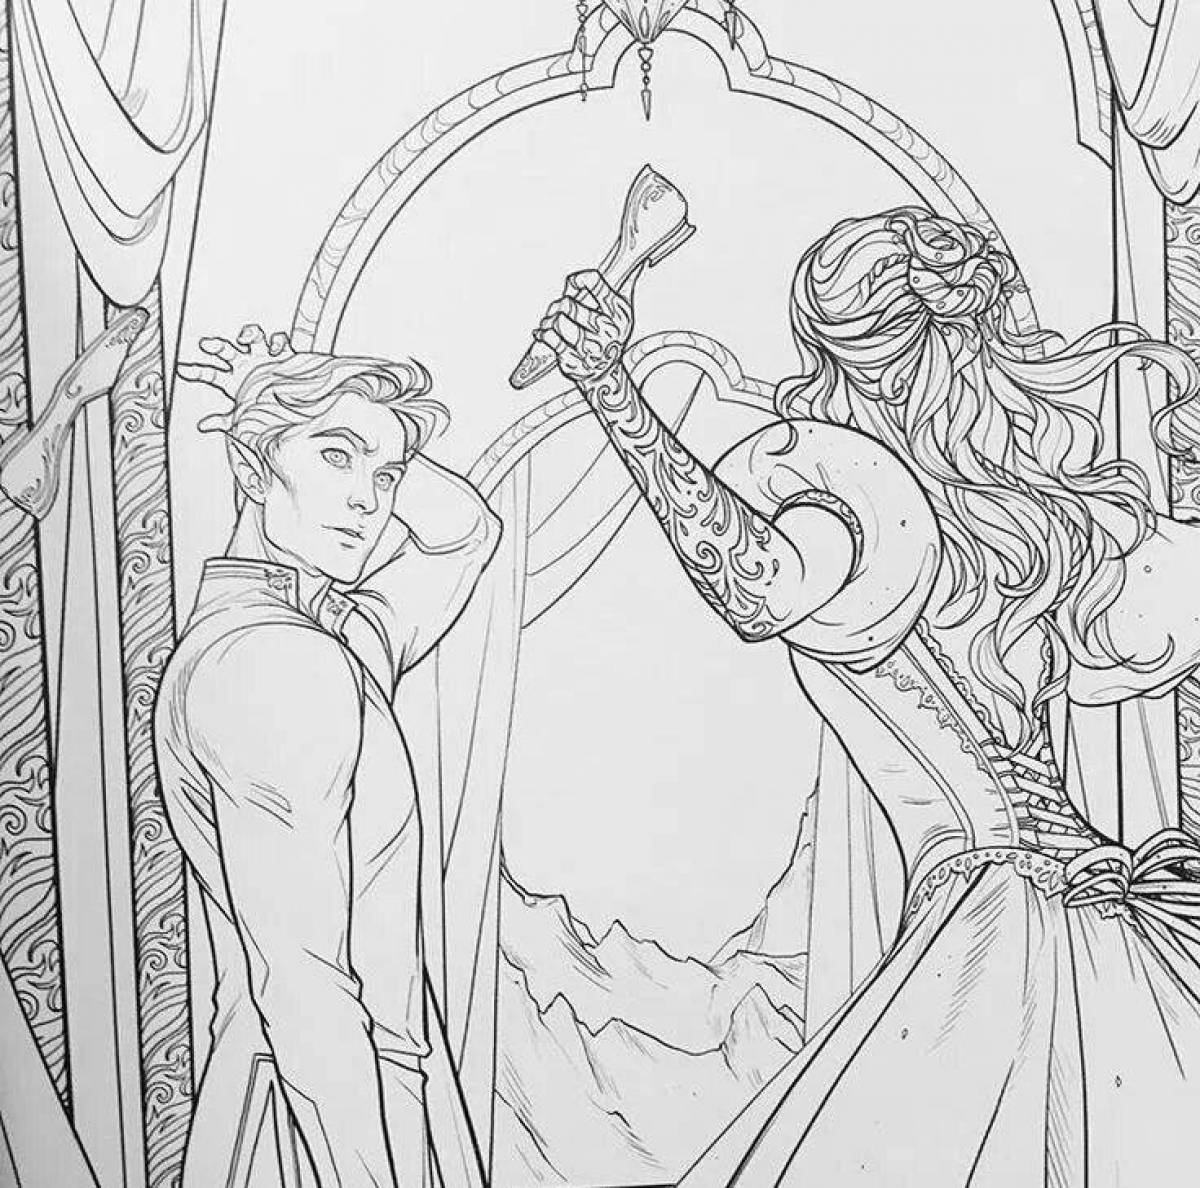 A Court of Thorns and Roses Coloring book